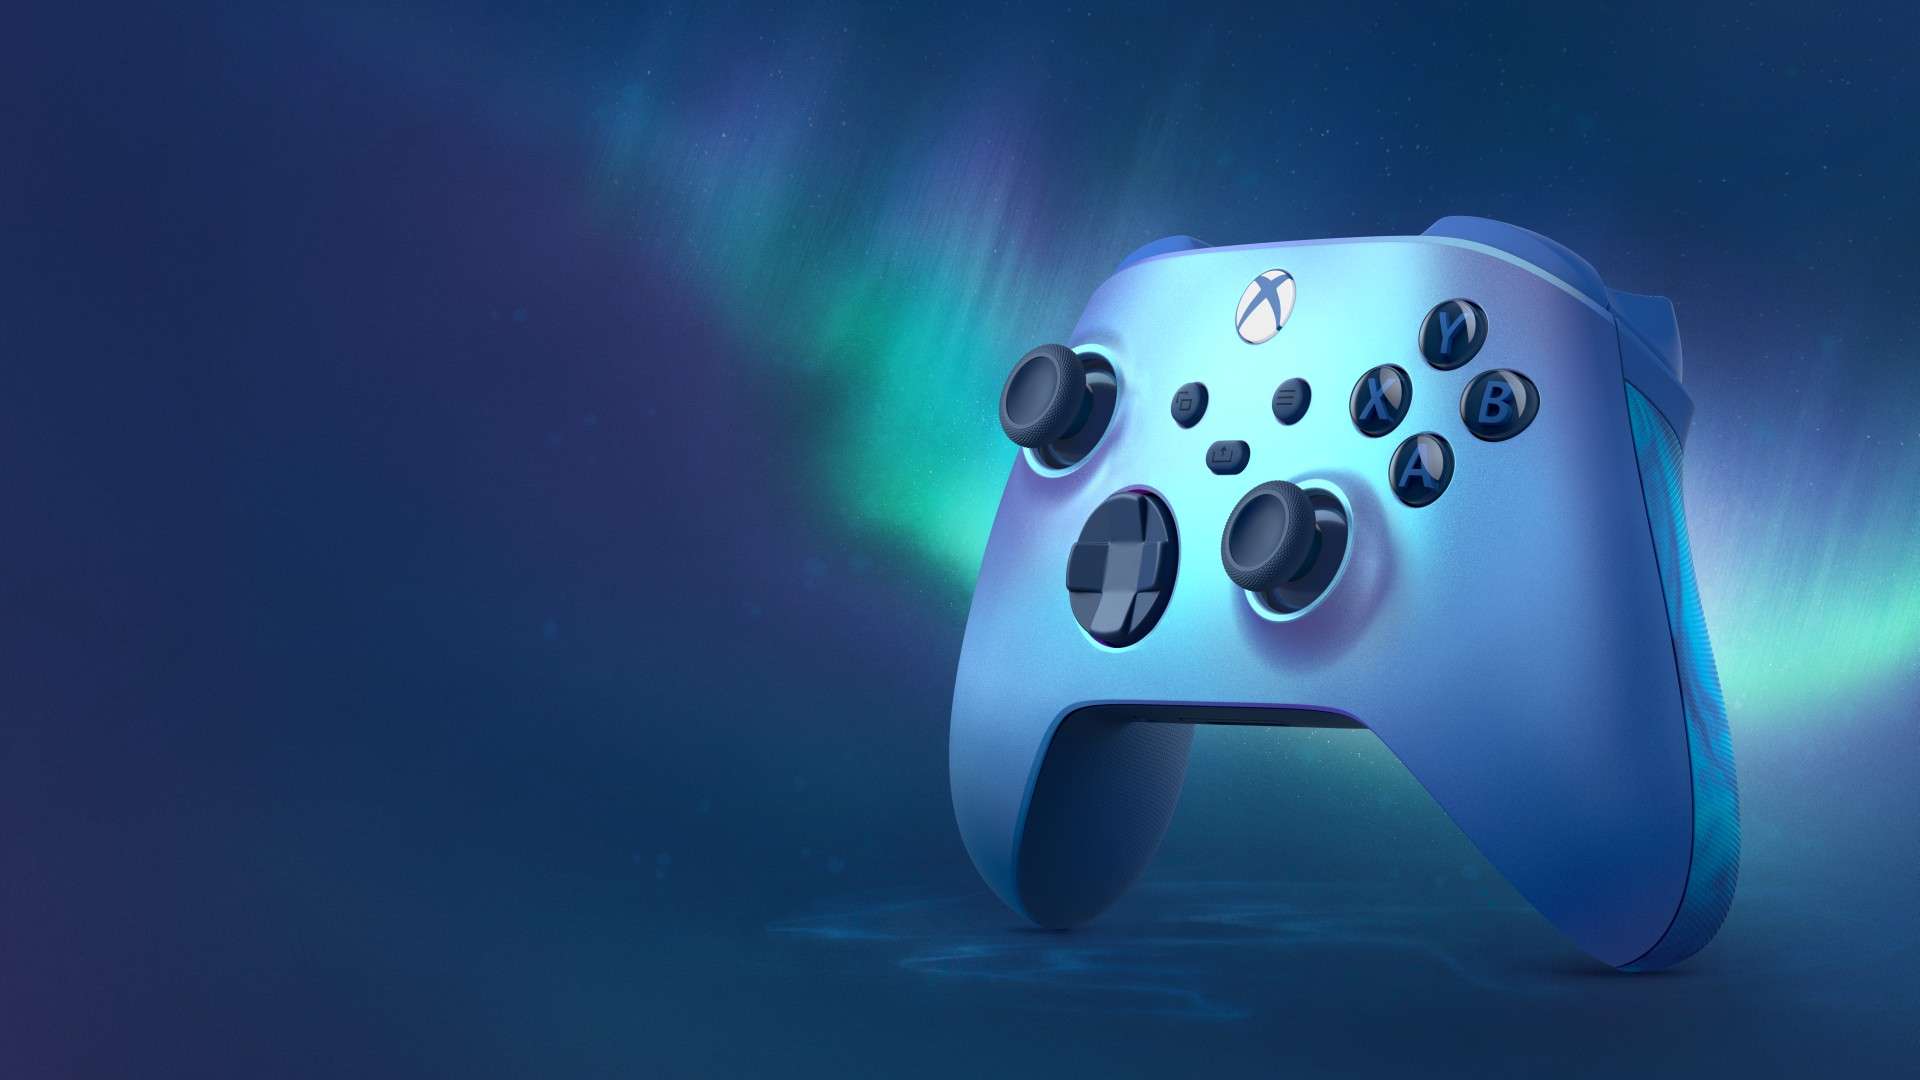 HHW Gaming: Xbox’s Latest Wireless Controller Feautres A “Dazzling Blue” Finish & Rubber Grips